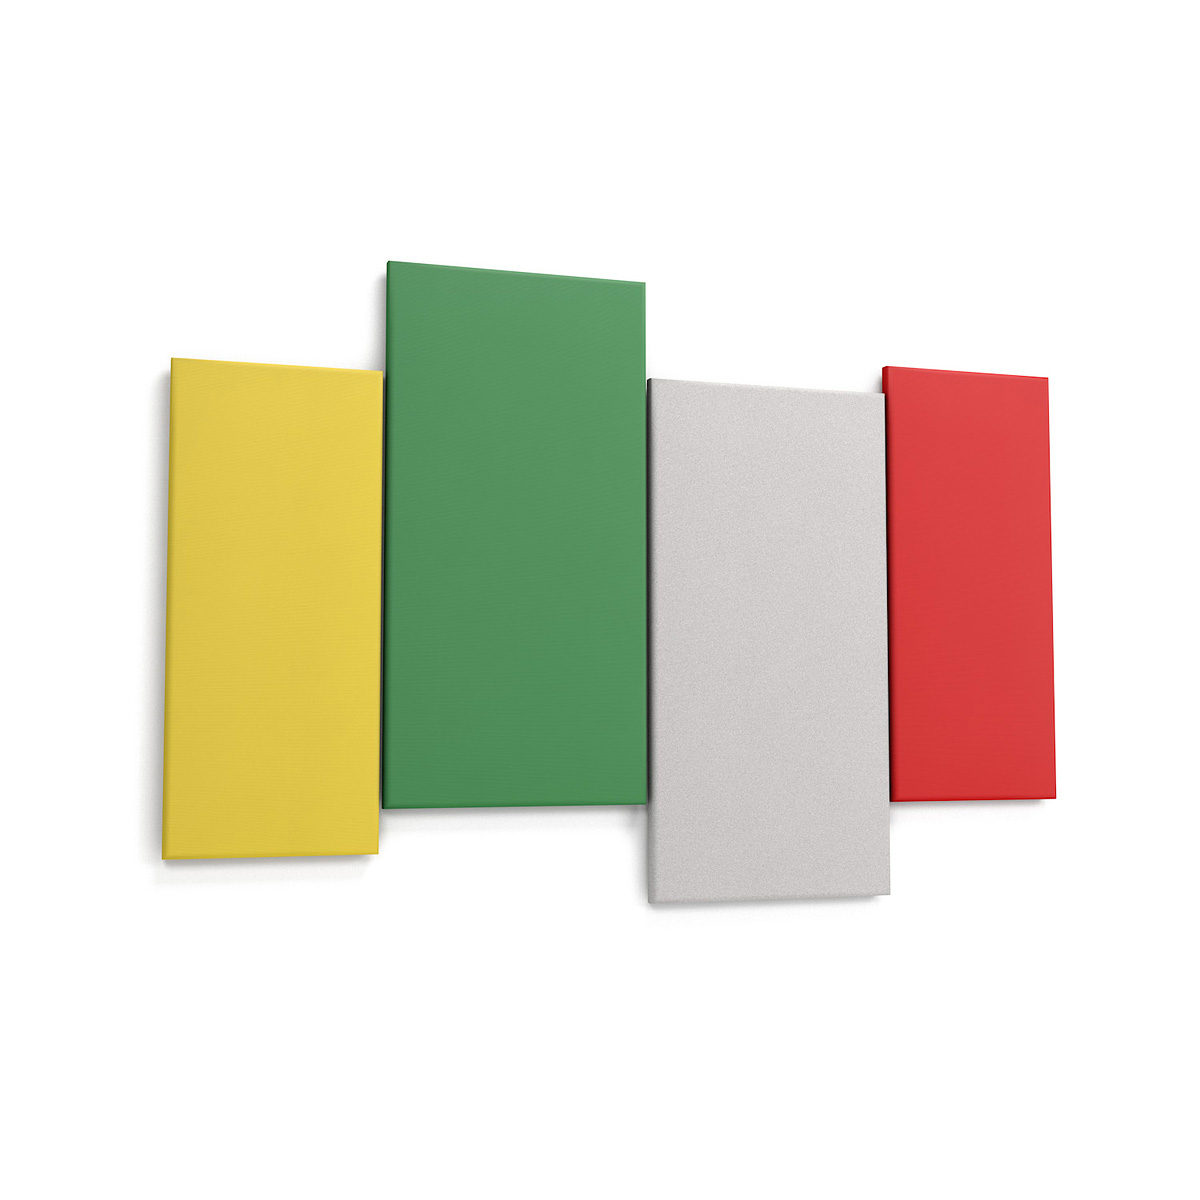 STRATOS™ Rectangle Noise Baffles Can Double Up As Wall Art To Brighten Up Office Walls                  